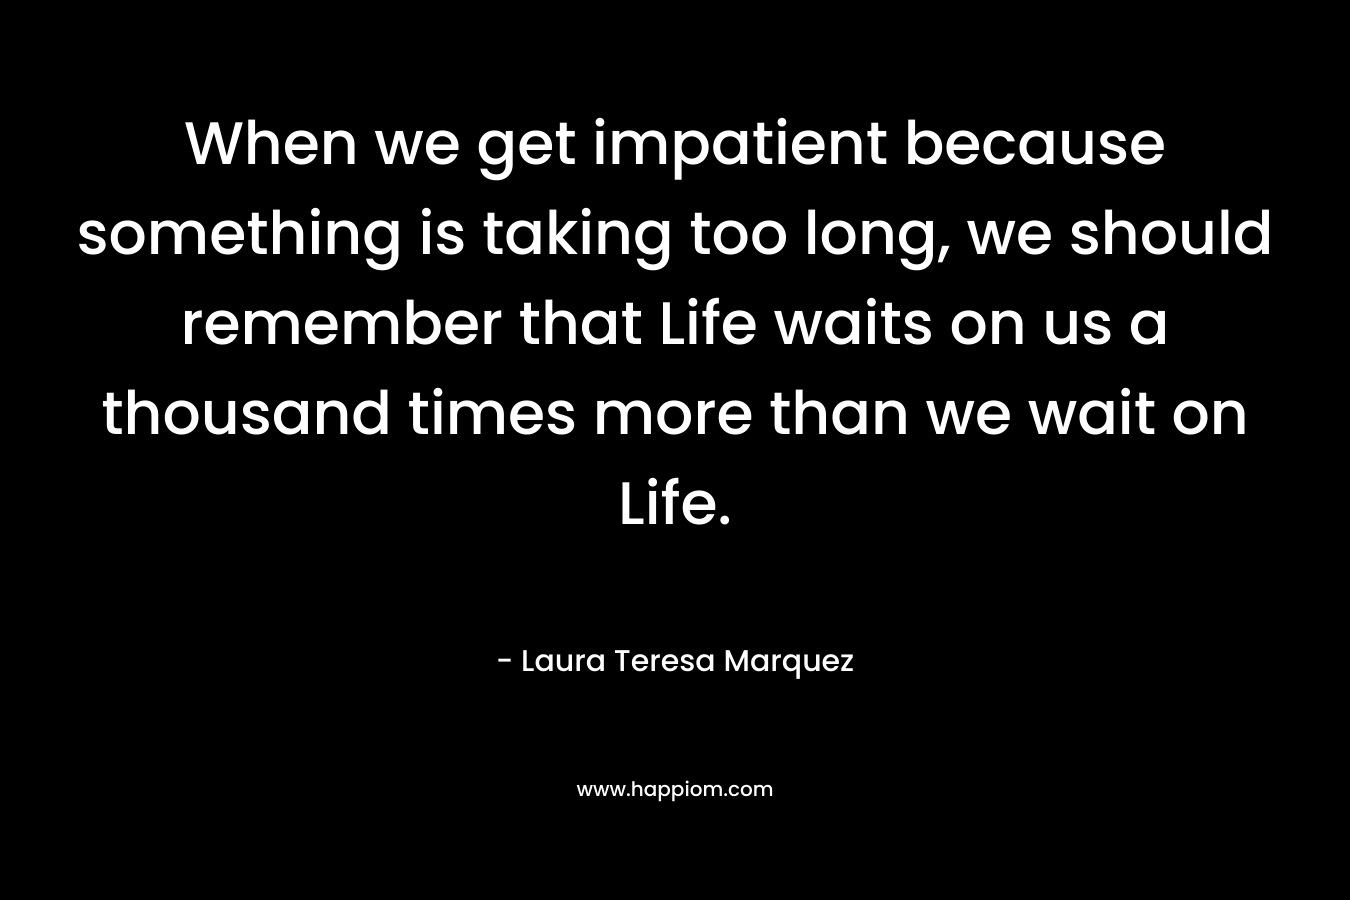 When we get impatient because something is taking too long, we should remember that Life waits on us a thousand times more than we wait on Life.